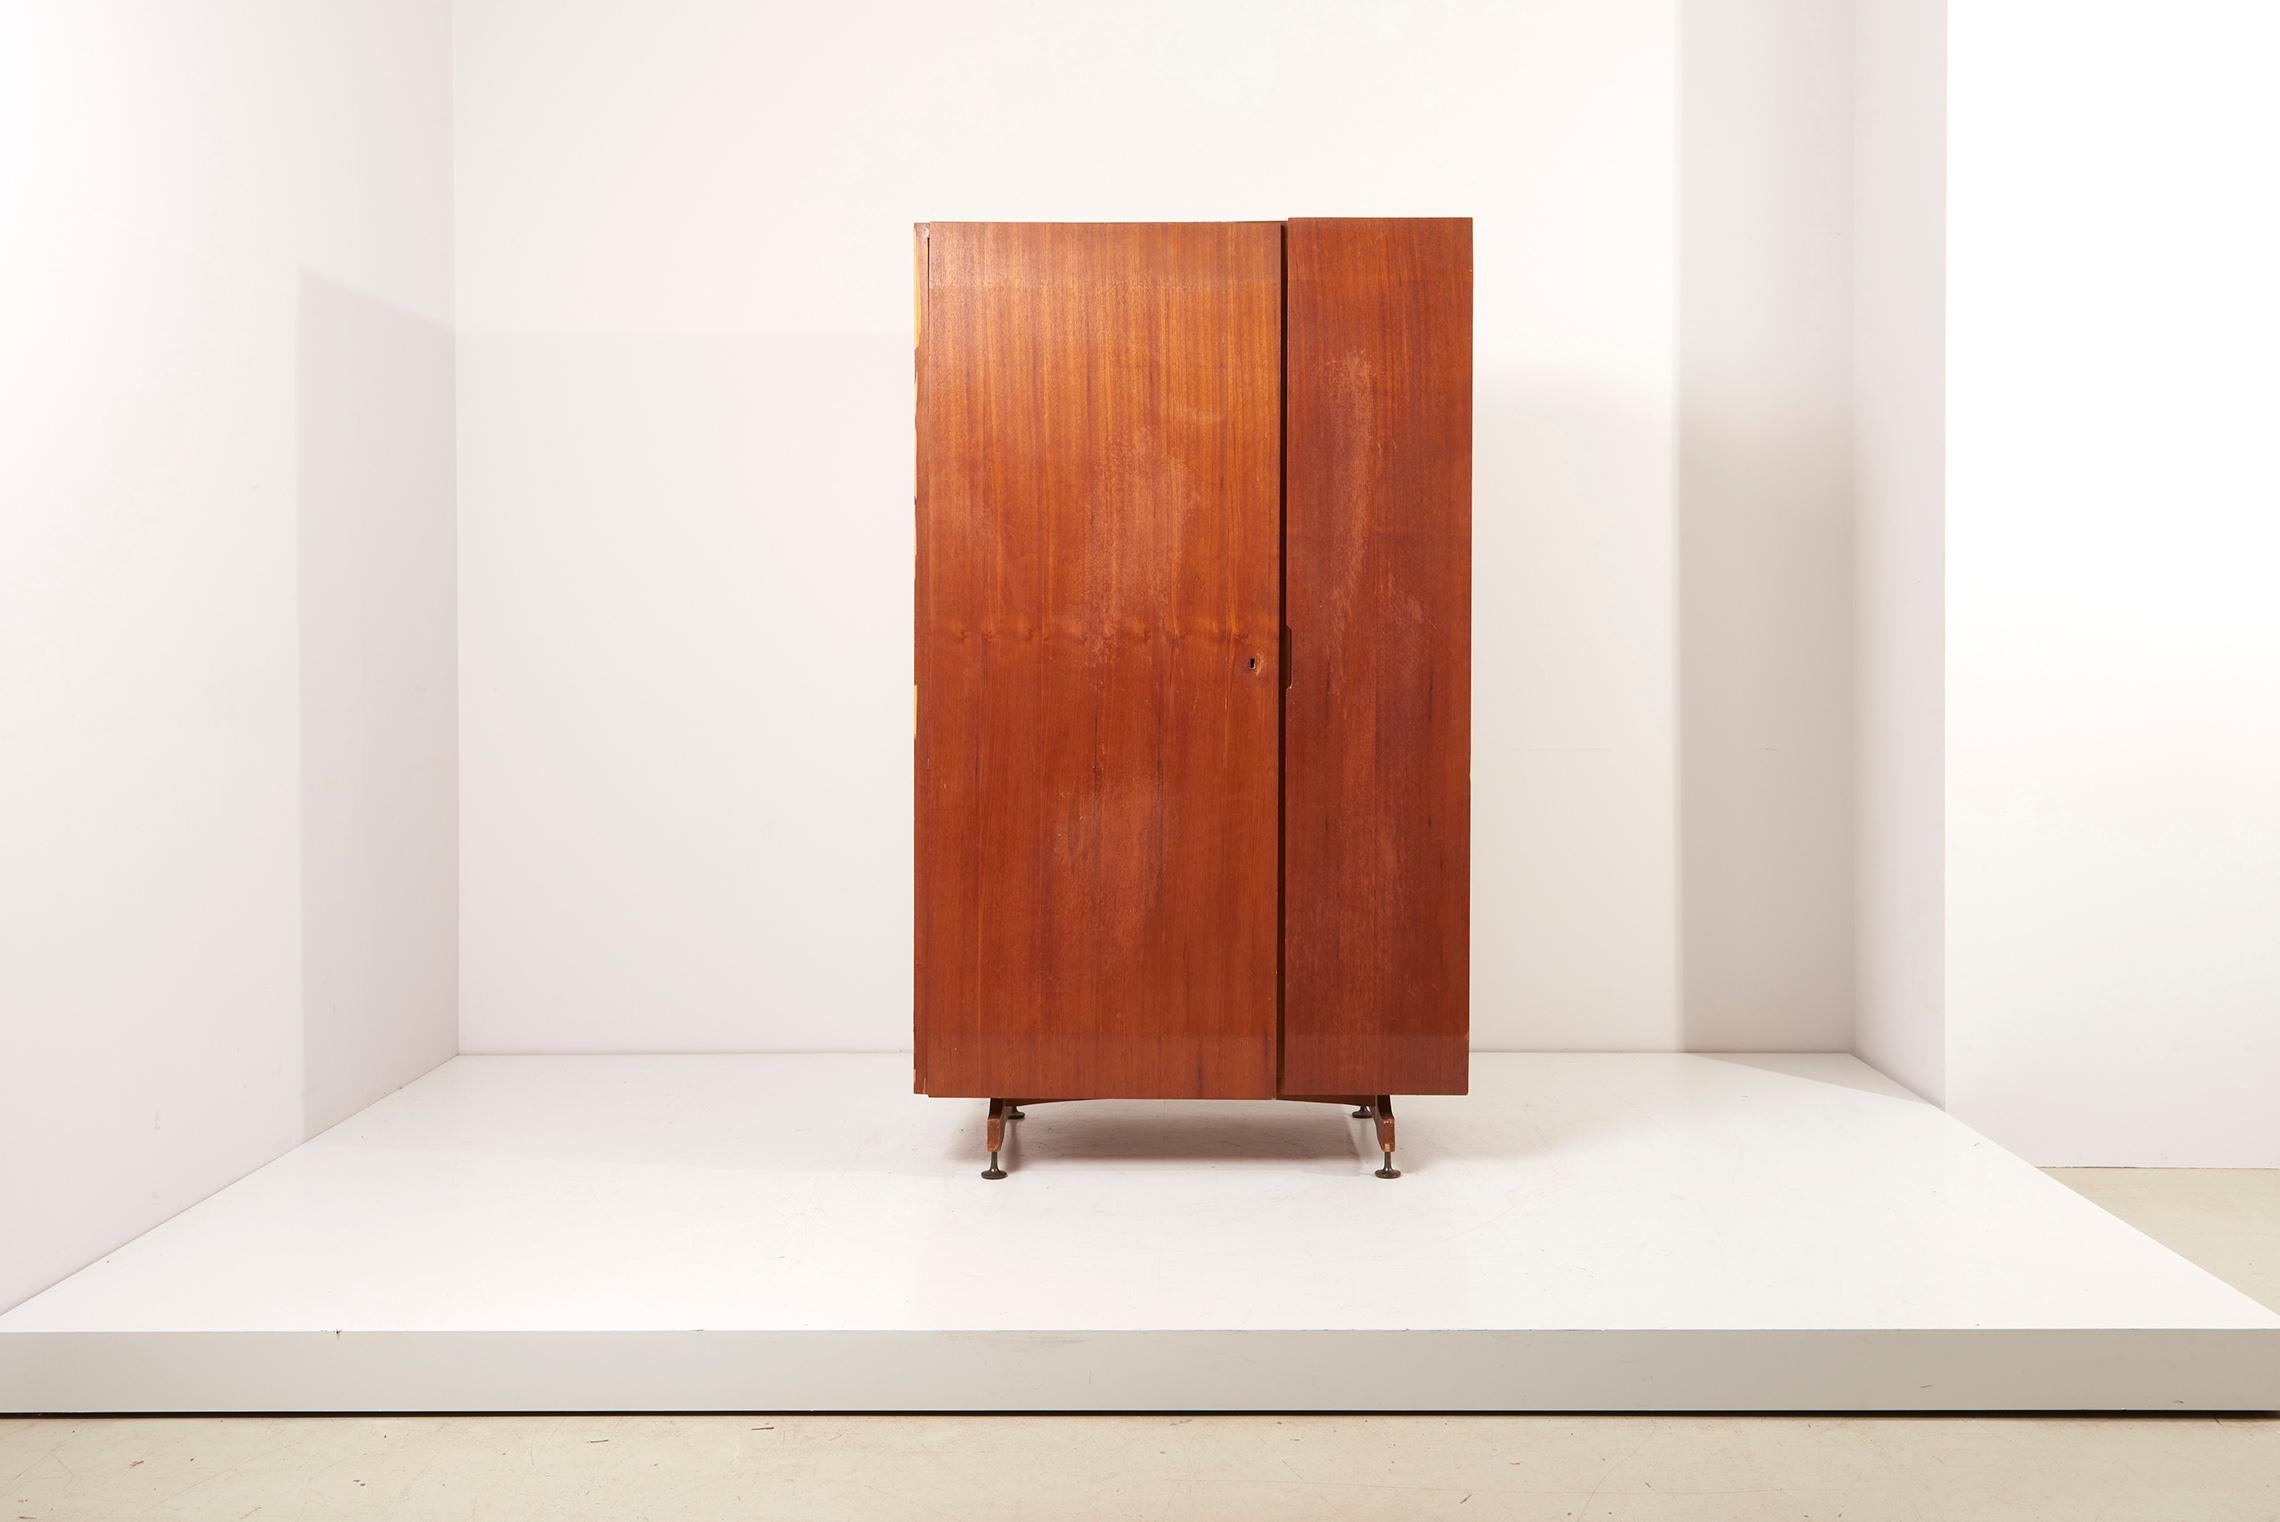 Architectural wooden cabinet, Italy 1950s
The piece is made in mahogany and has some nice sculptural details.